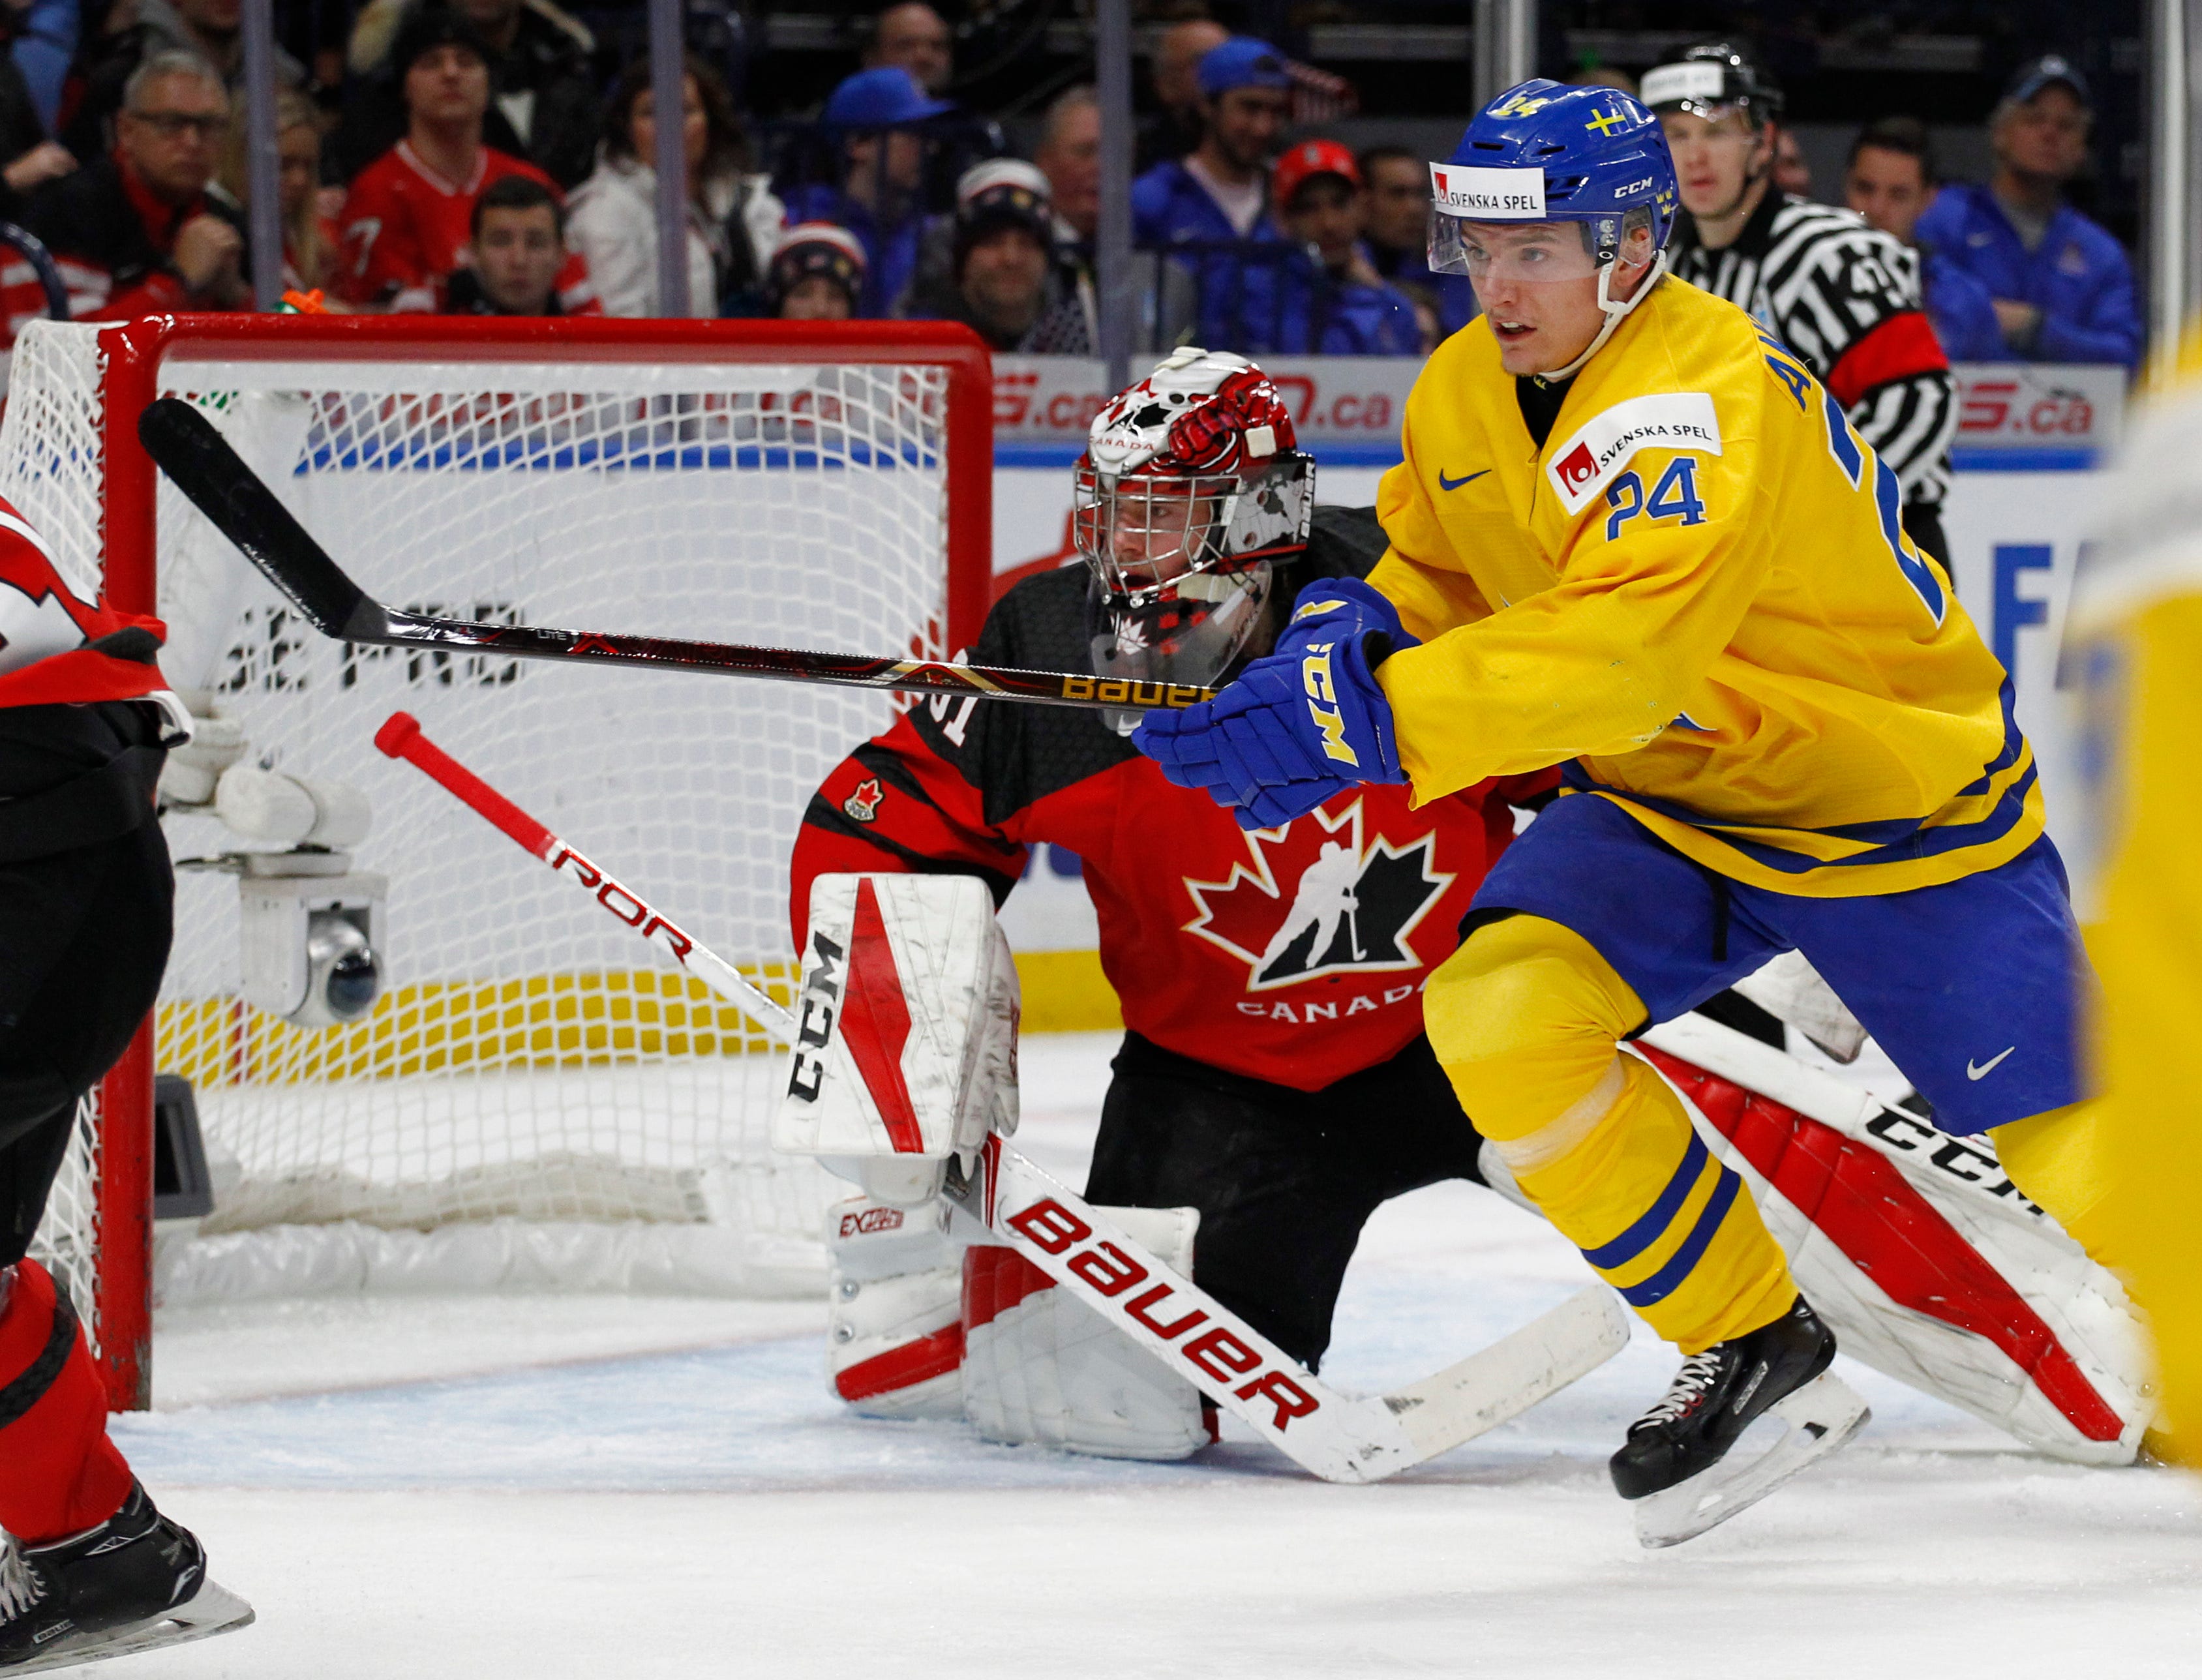 Swedish player Lias Andersson throws world juniors silver medal into stands